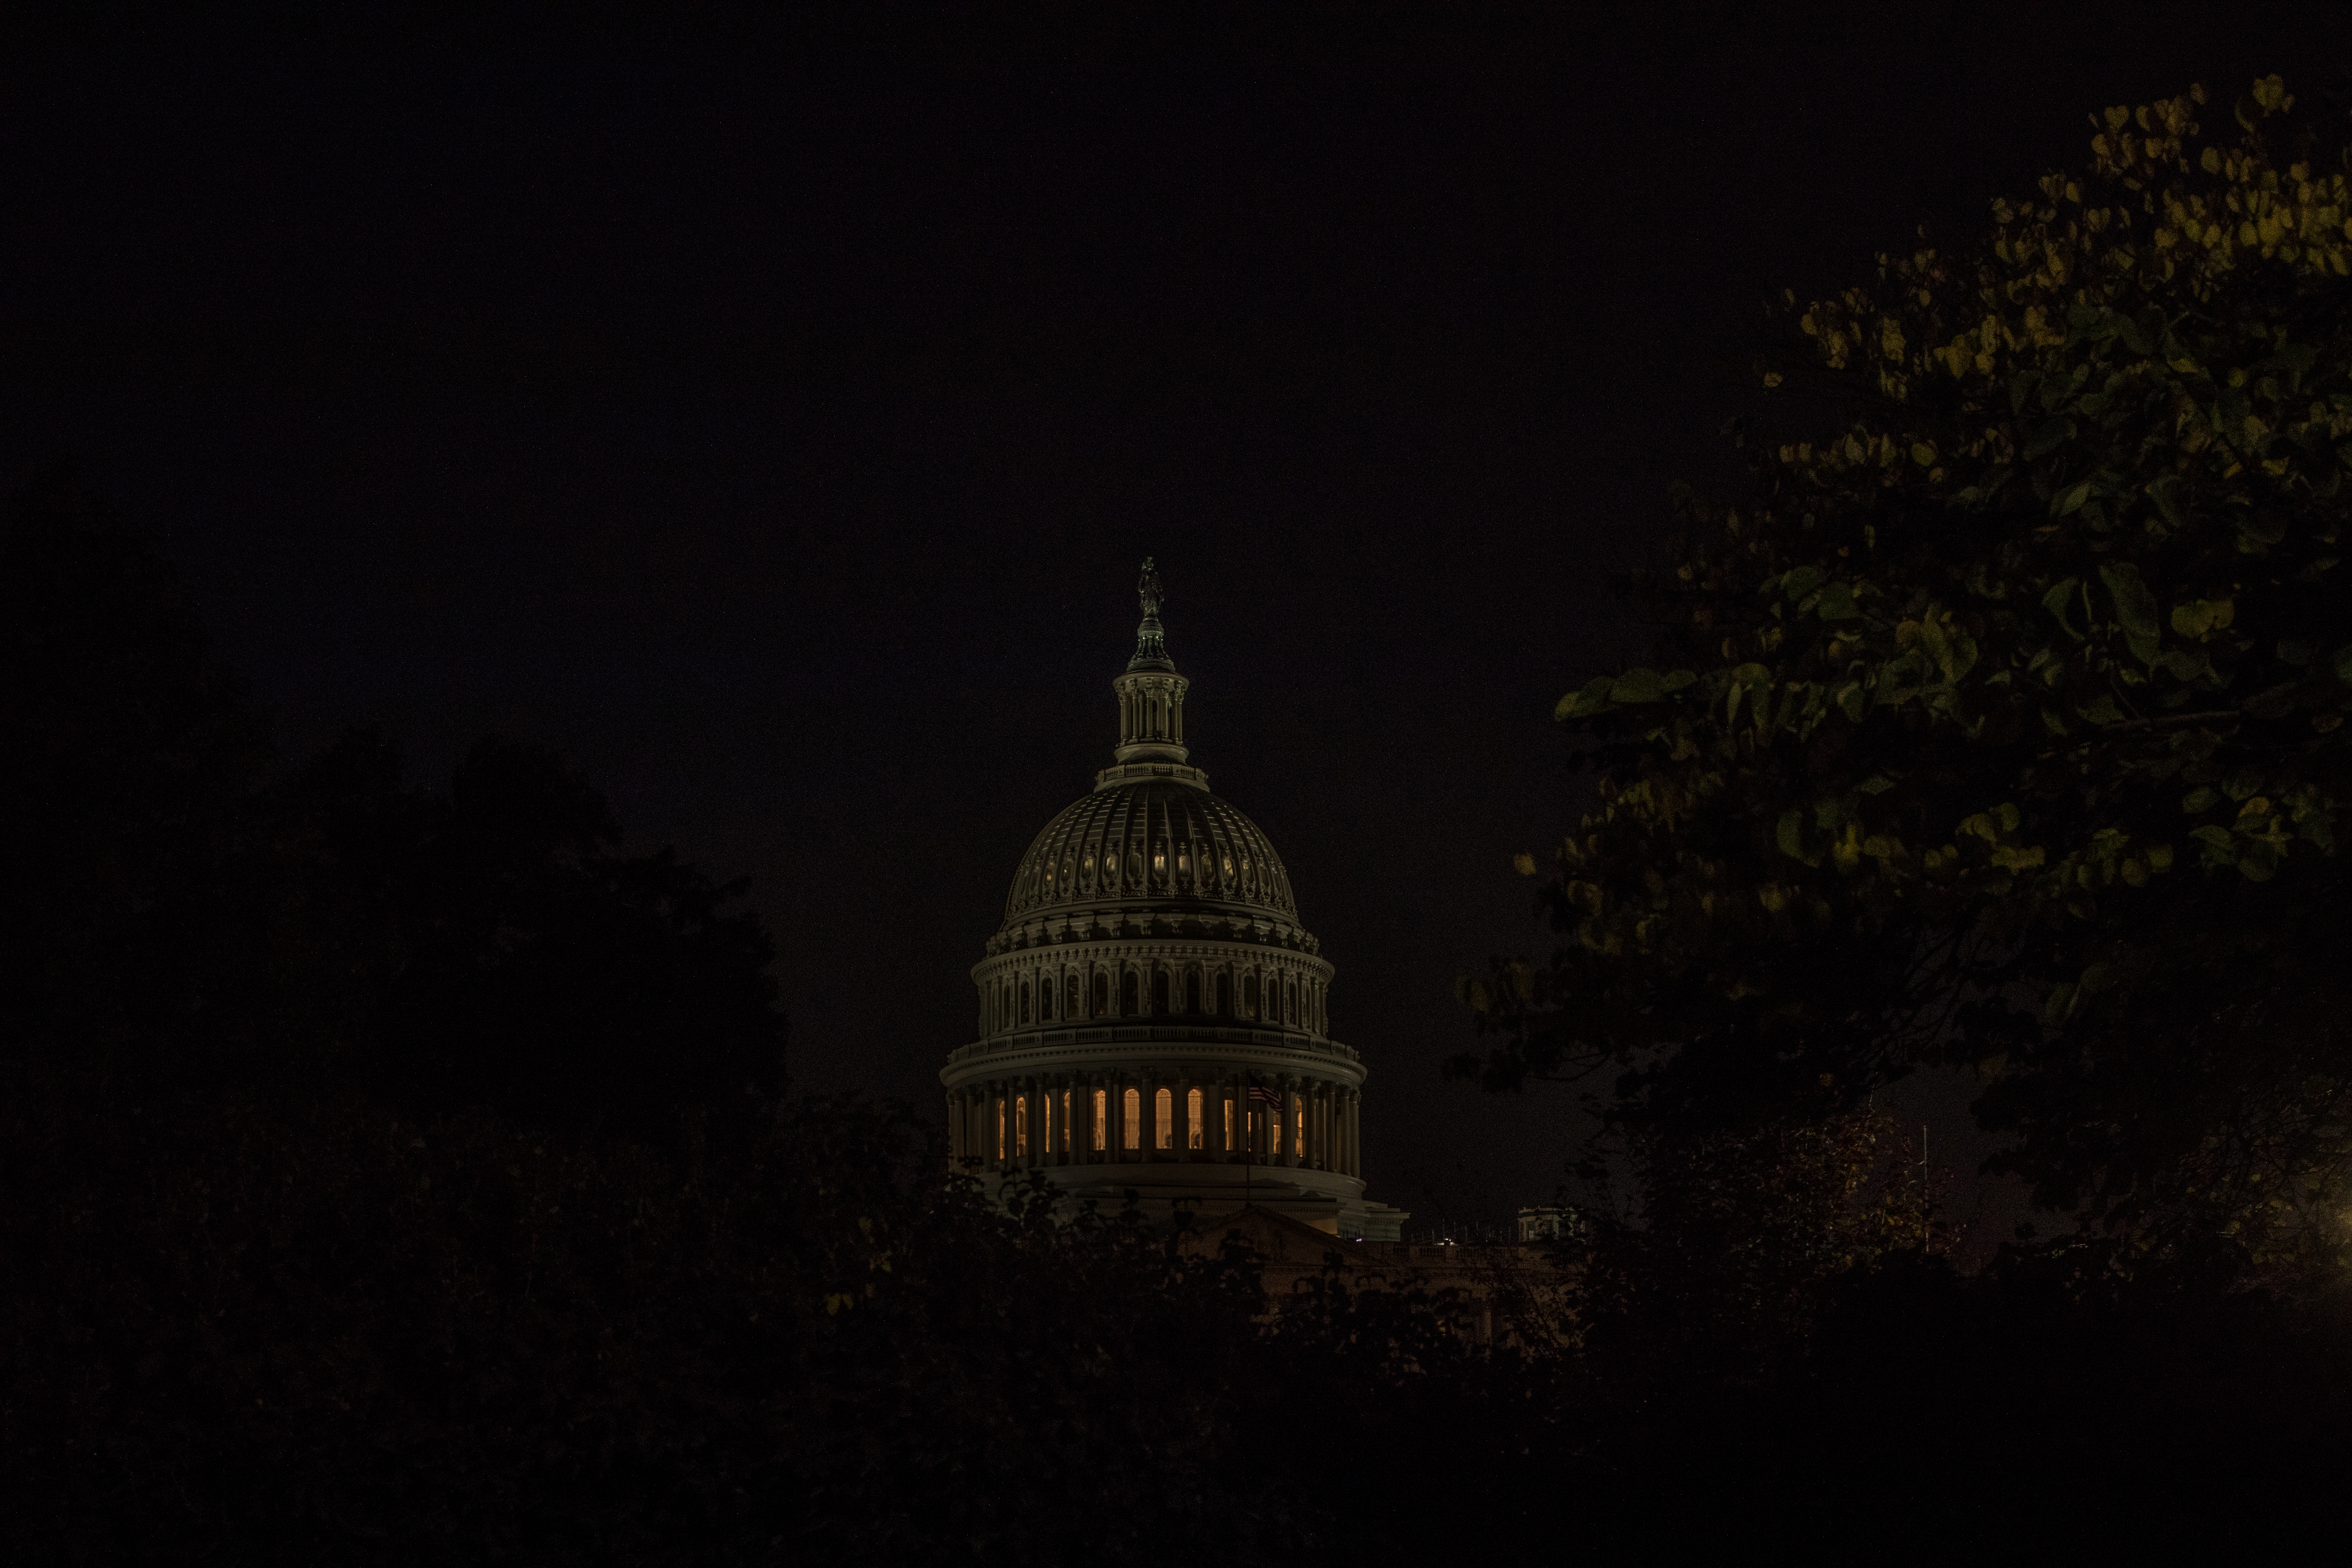 The U.S. Capitol lit up at night.